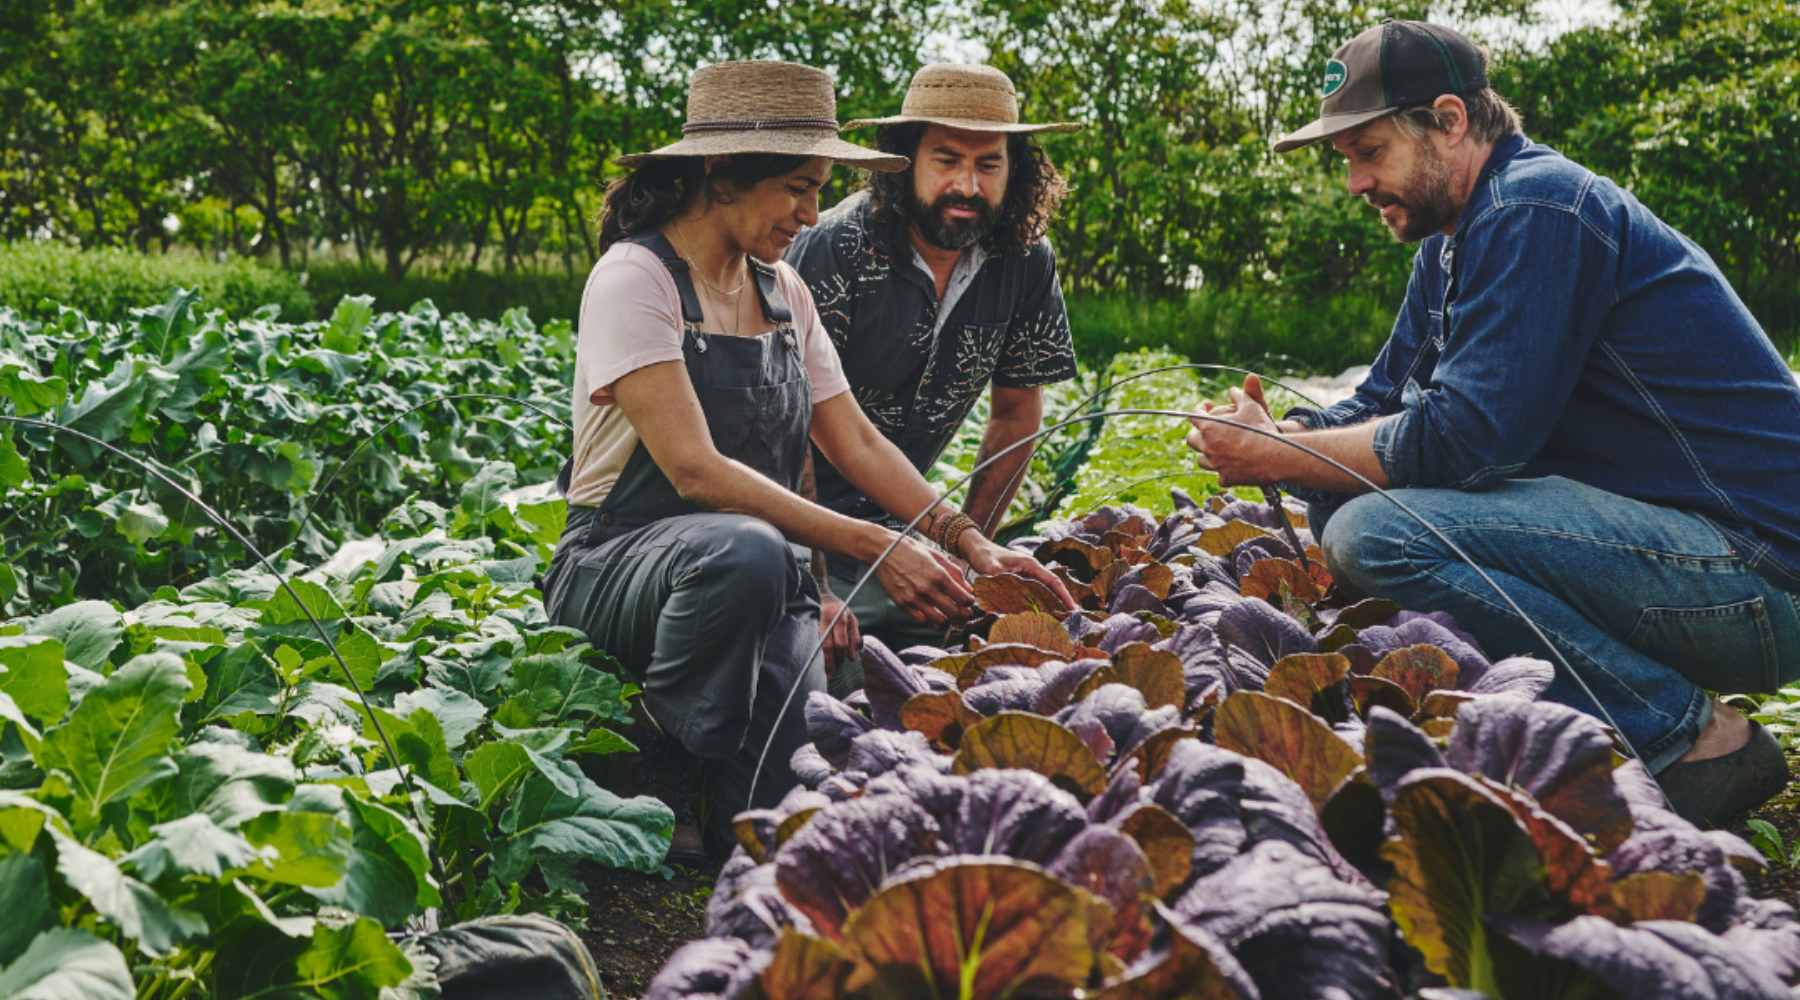 Two men and 1 woman leaning over a bed greens on a market farm